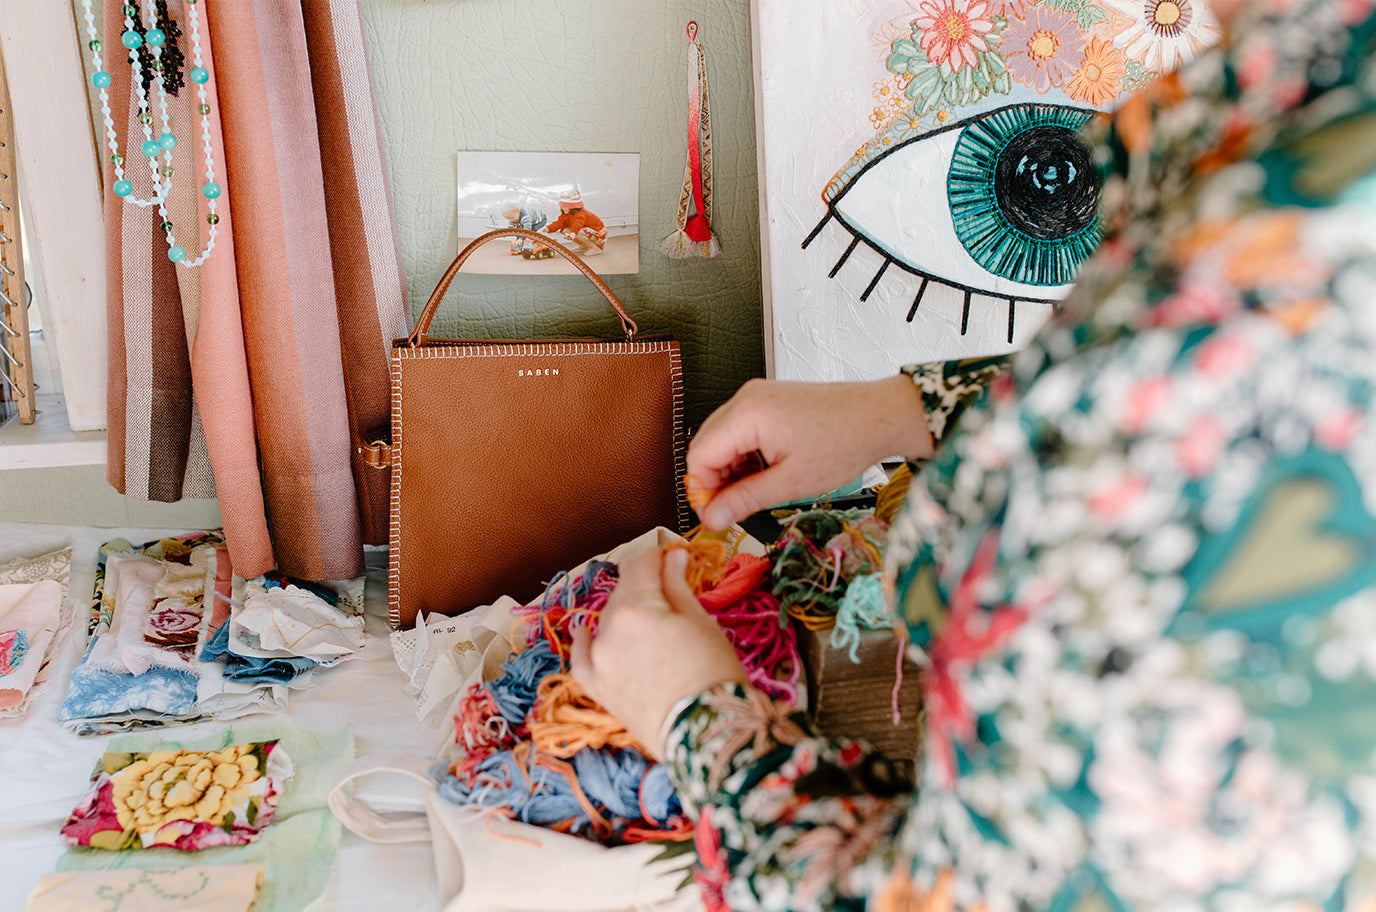 saben x fleur woods collaboration embroidery artist at home